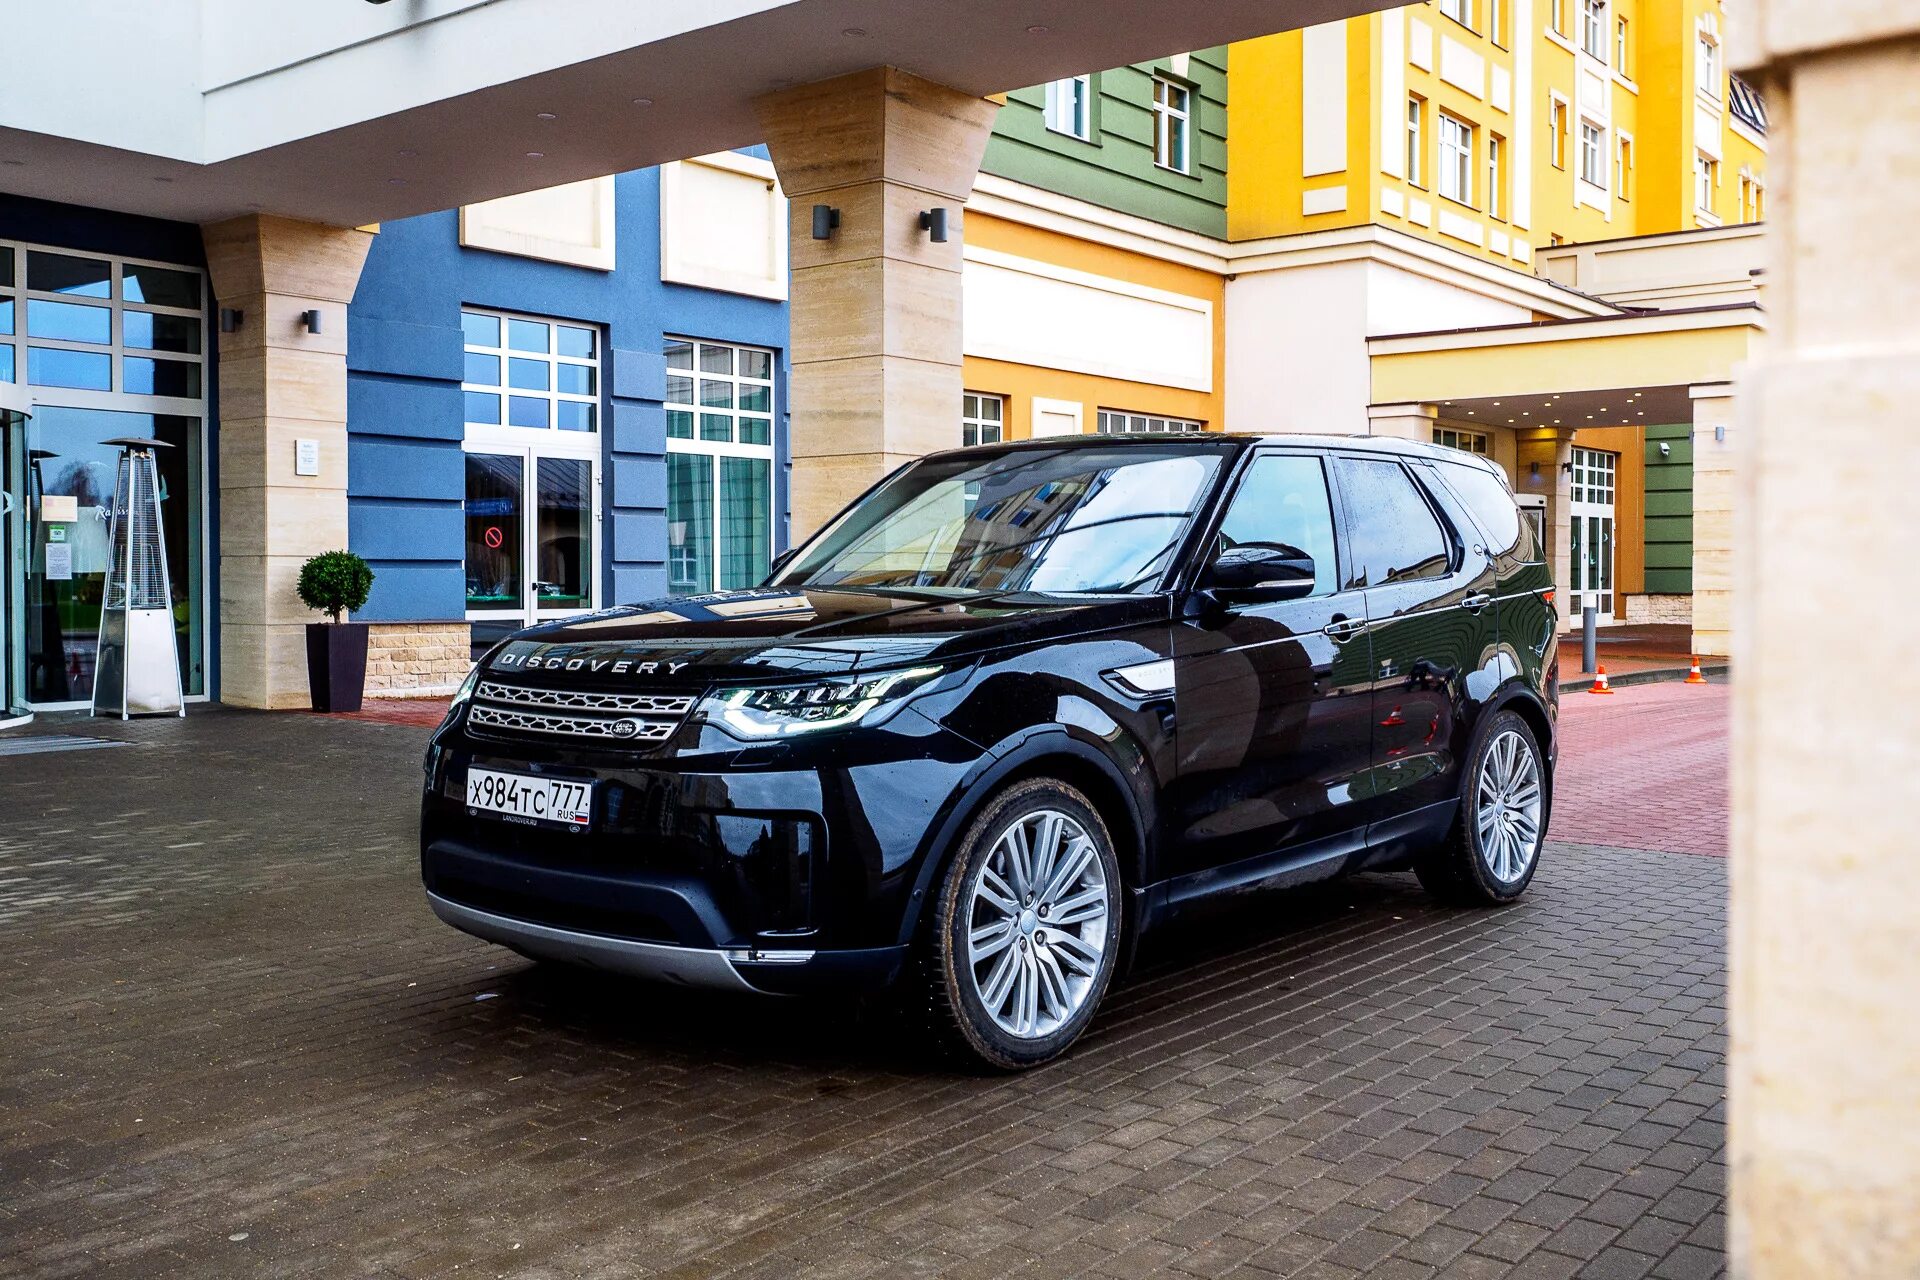 Land Rover Discovery 5. Range Rover Discovery 5. Ленд Ровер Дискавери 5 черный. Range Rover Discovery 5 2017. Дискавери тд5